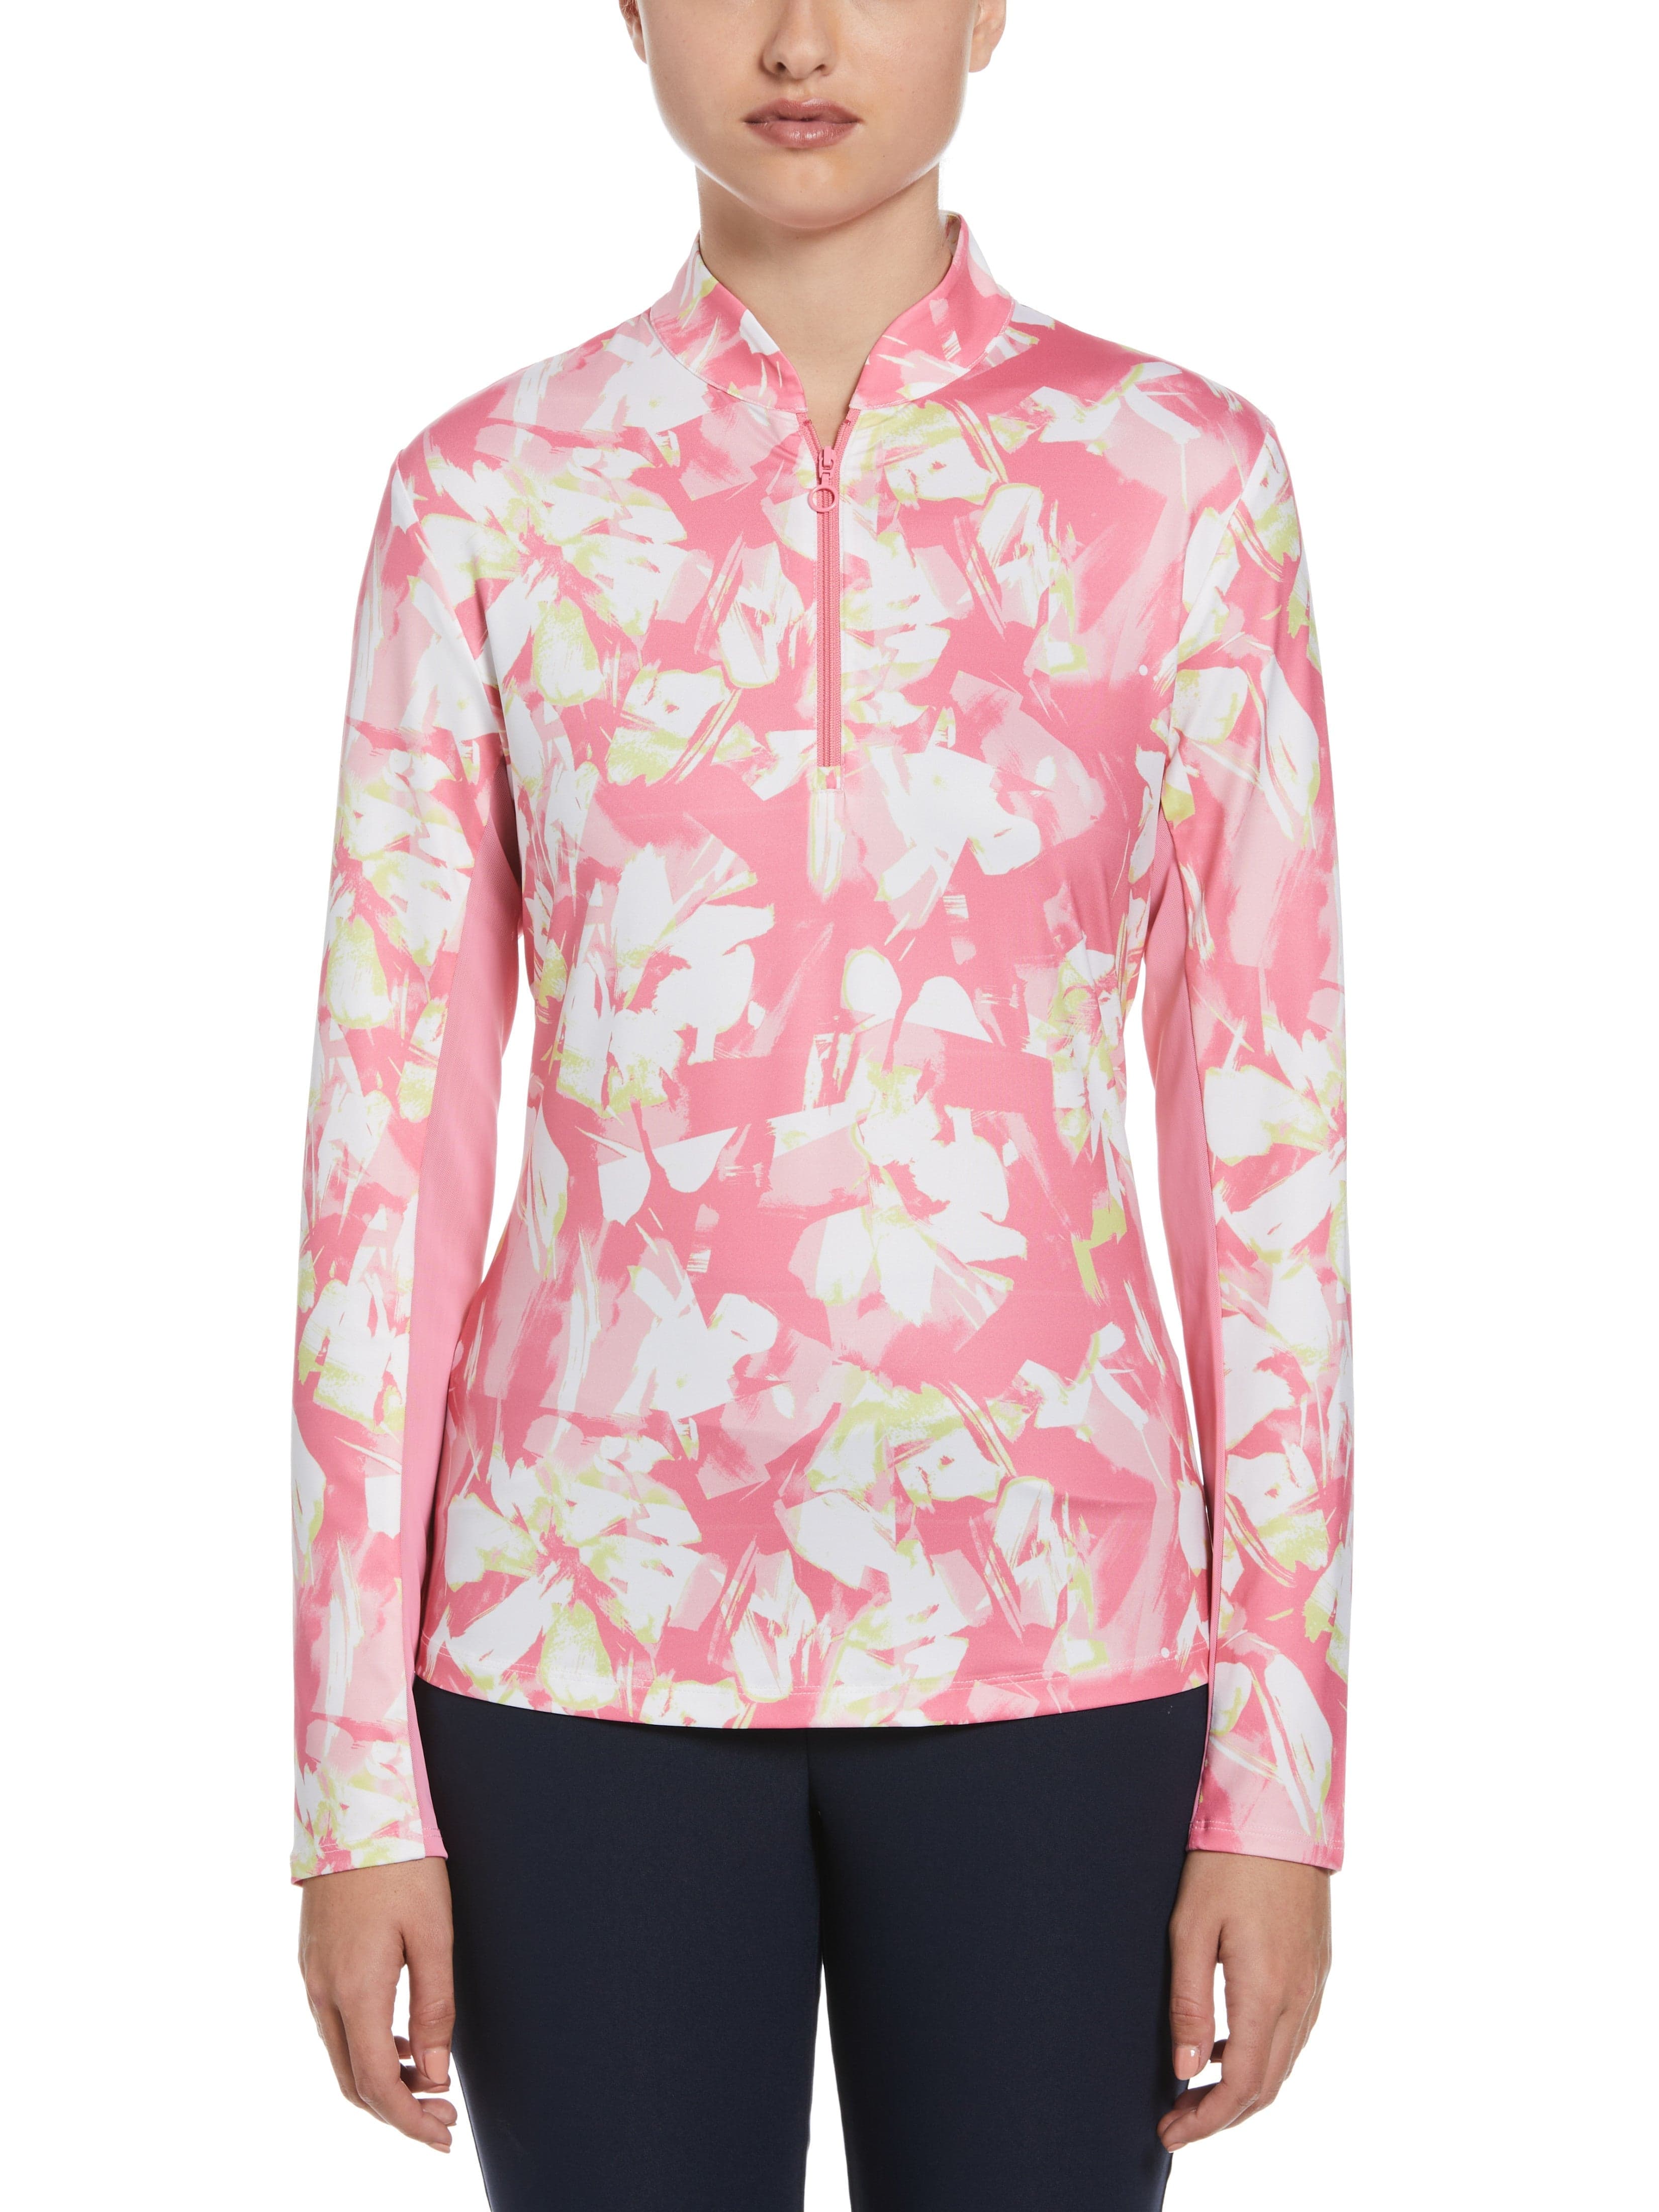 PGA TOUR Apparel Womens Floral Print Long Sleeve Golf Polo Shirt, Size Small, Flowering Ginger Pink, Polyester/Spandex | Golf Apparel Shop